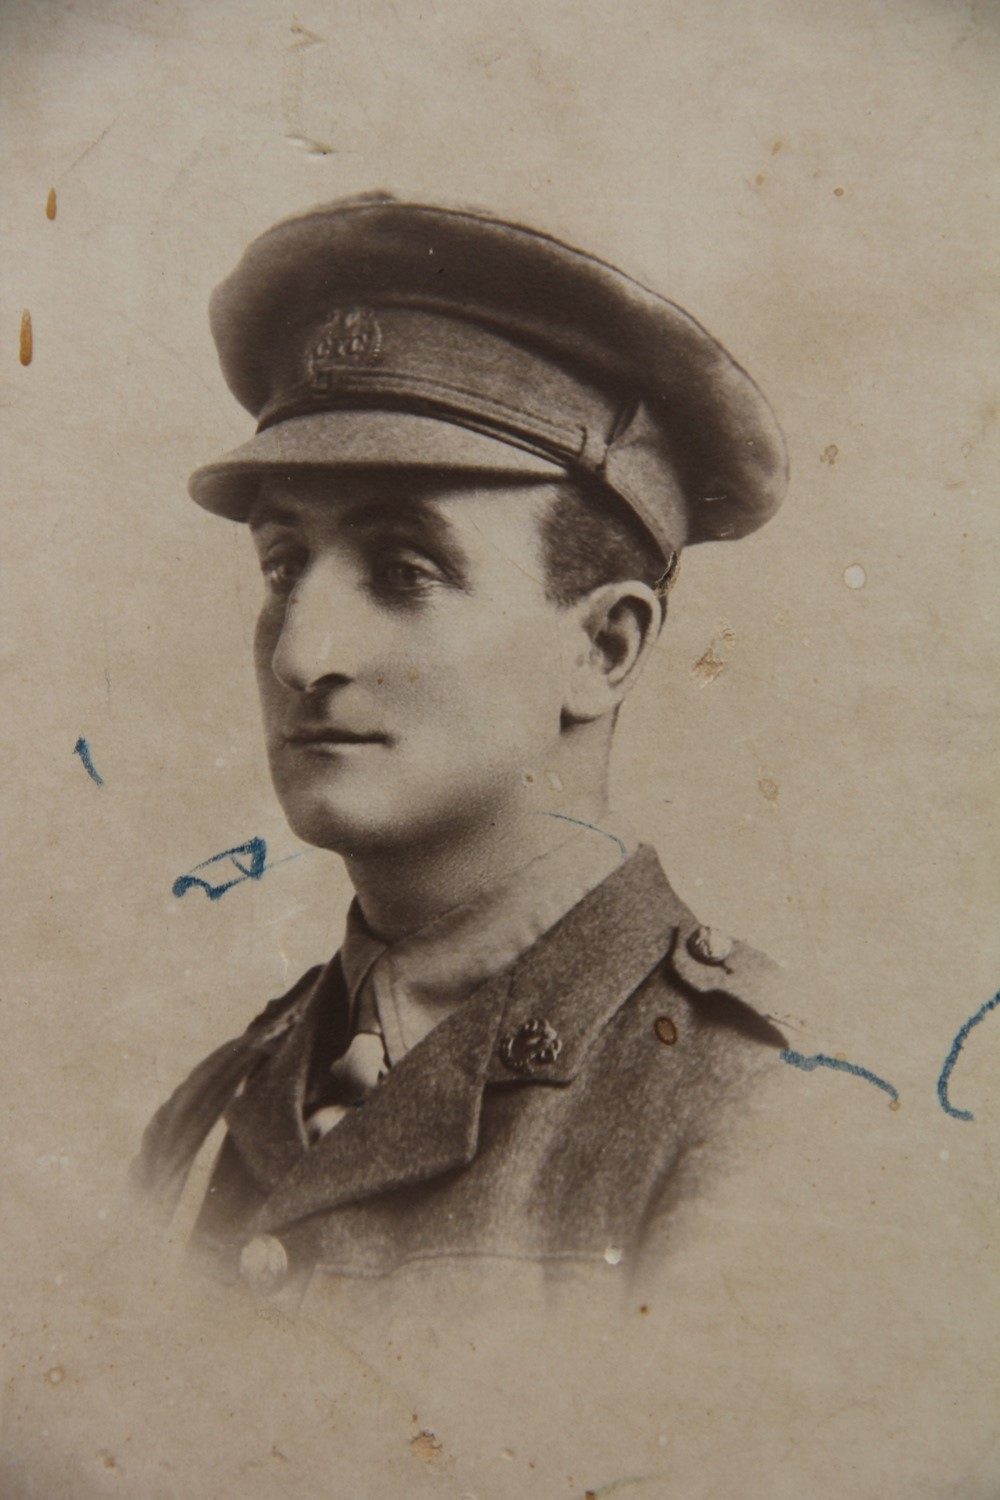 Gordon Harper as a second lieutenant in the Canterbury Mounted Rifles in 1916.